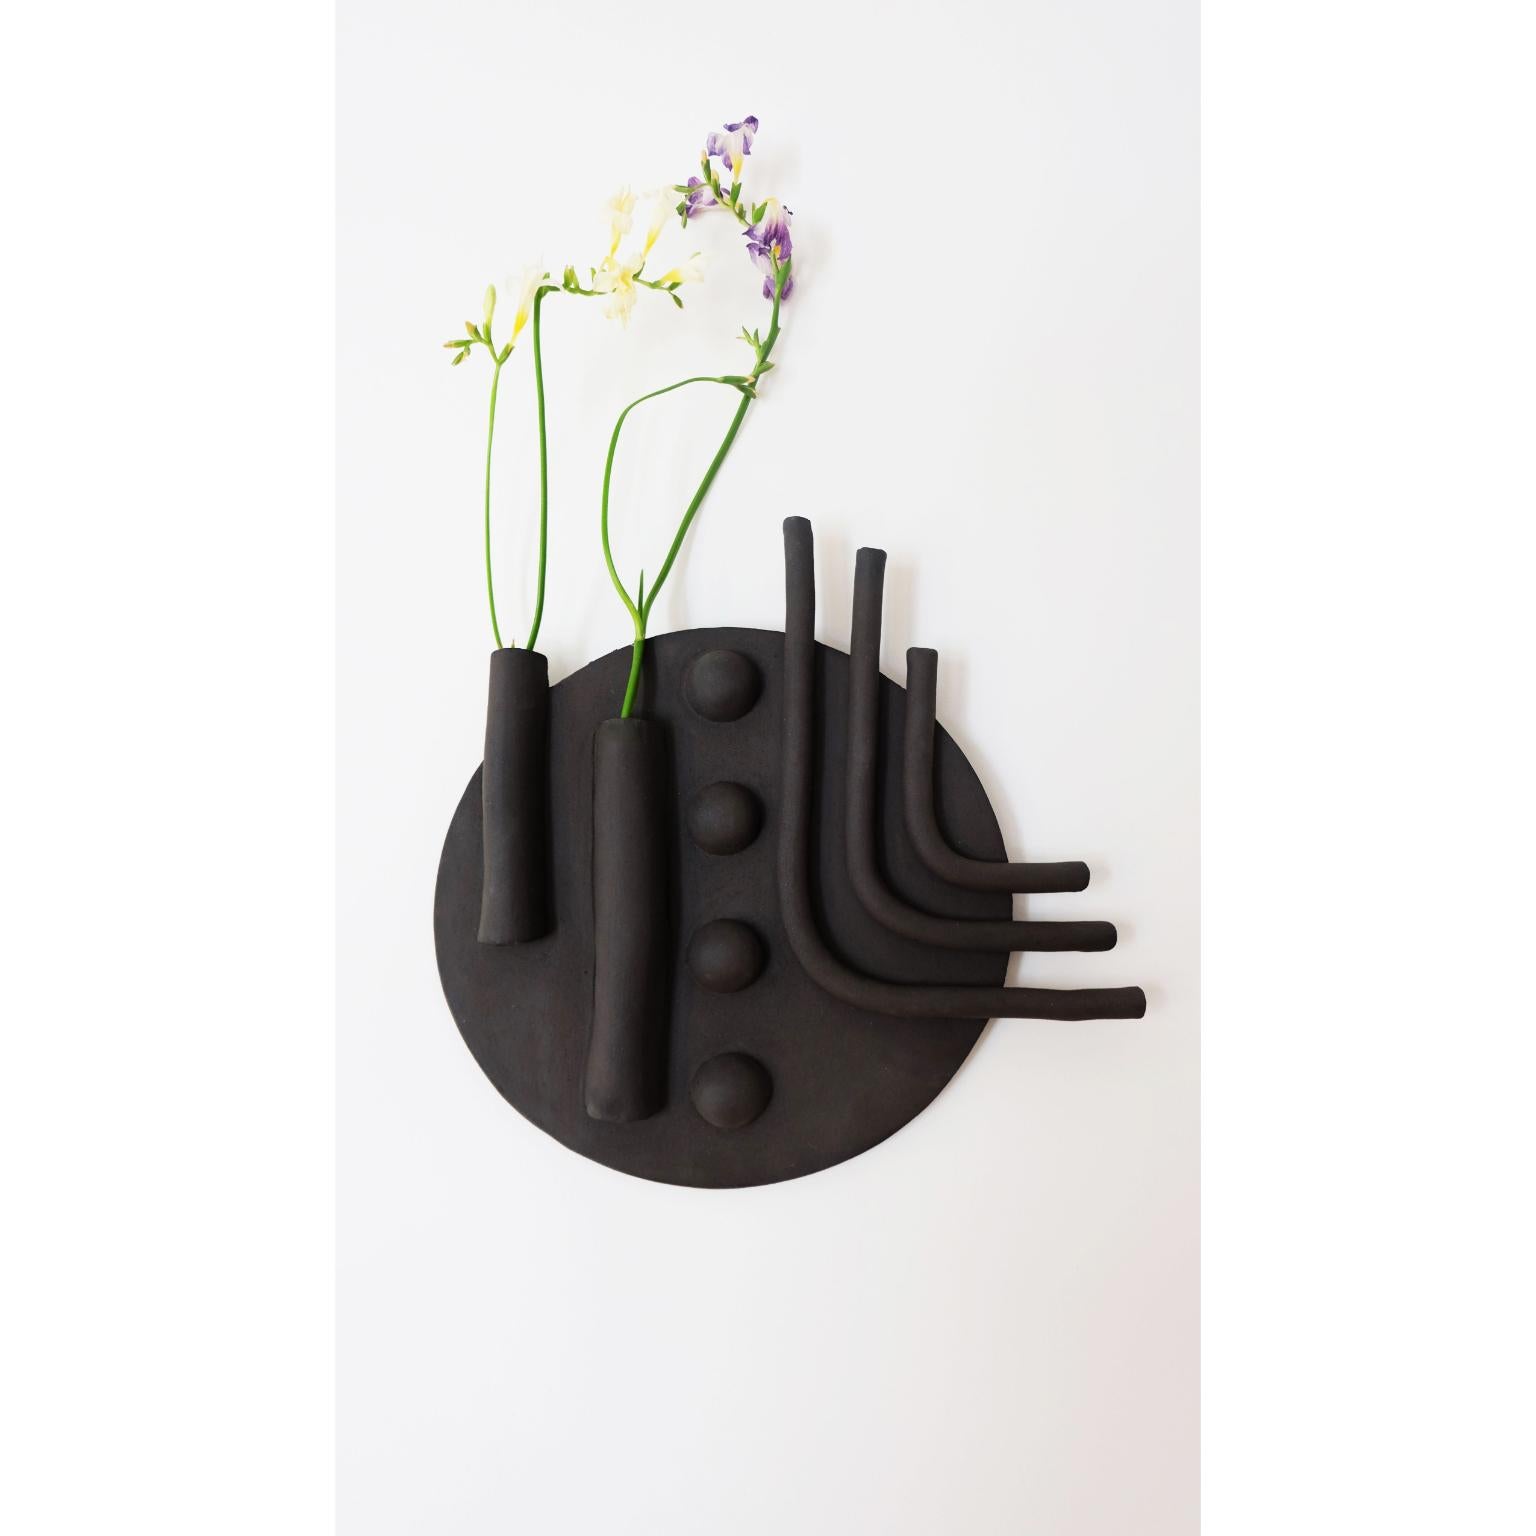 Unique vase and wall sculpt by Ia Kutateladze
Dimensions: D 28 
Materials: Clay

A bold, sculpture for the wall that could also be used as a vase. Strong geometrical shapes brought together to create a unique decorative piece for any type of